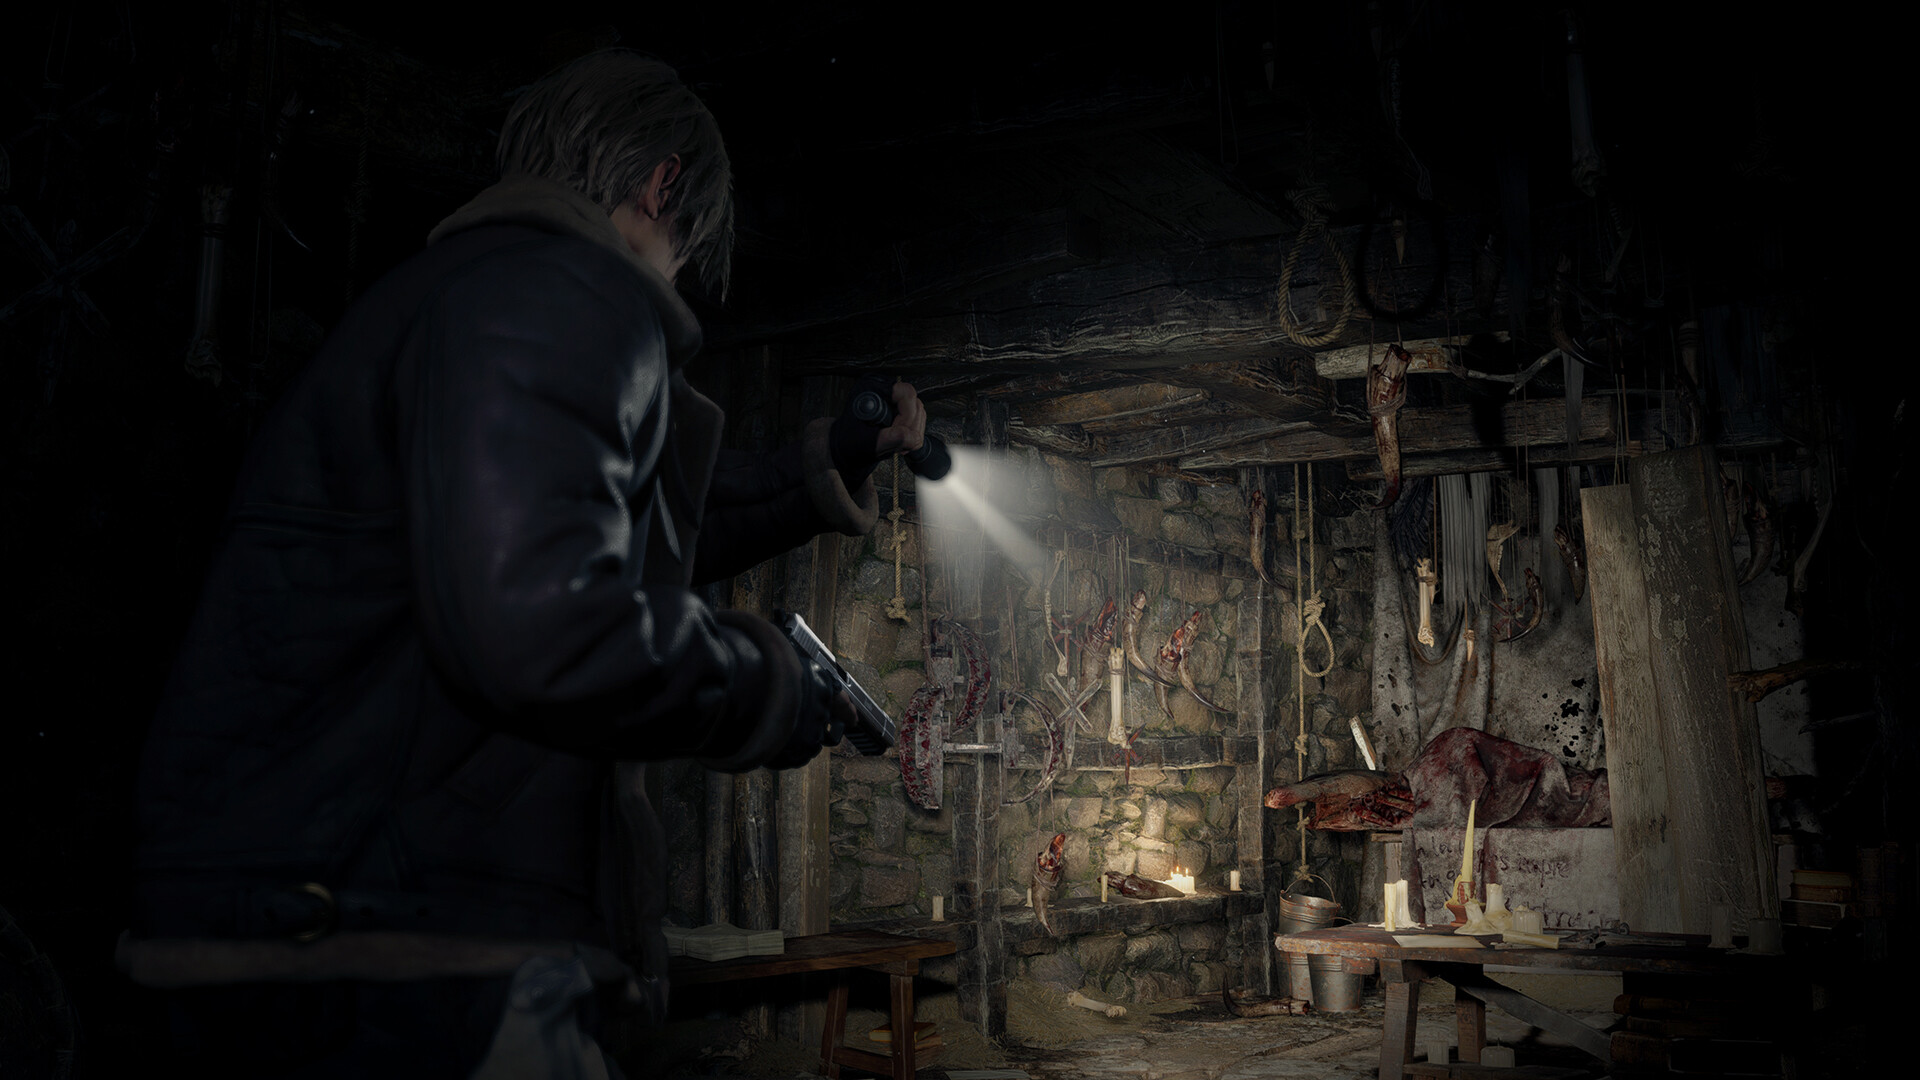 The Resident Evil 4 Collector's Edition Is Up For Pre-Order At EB